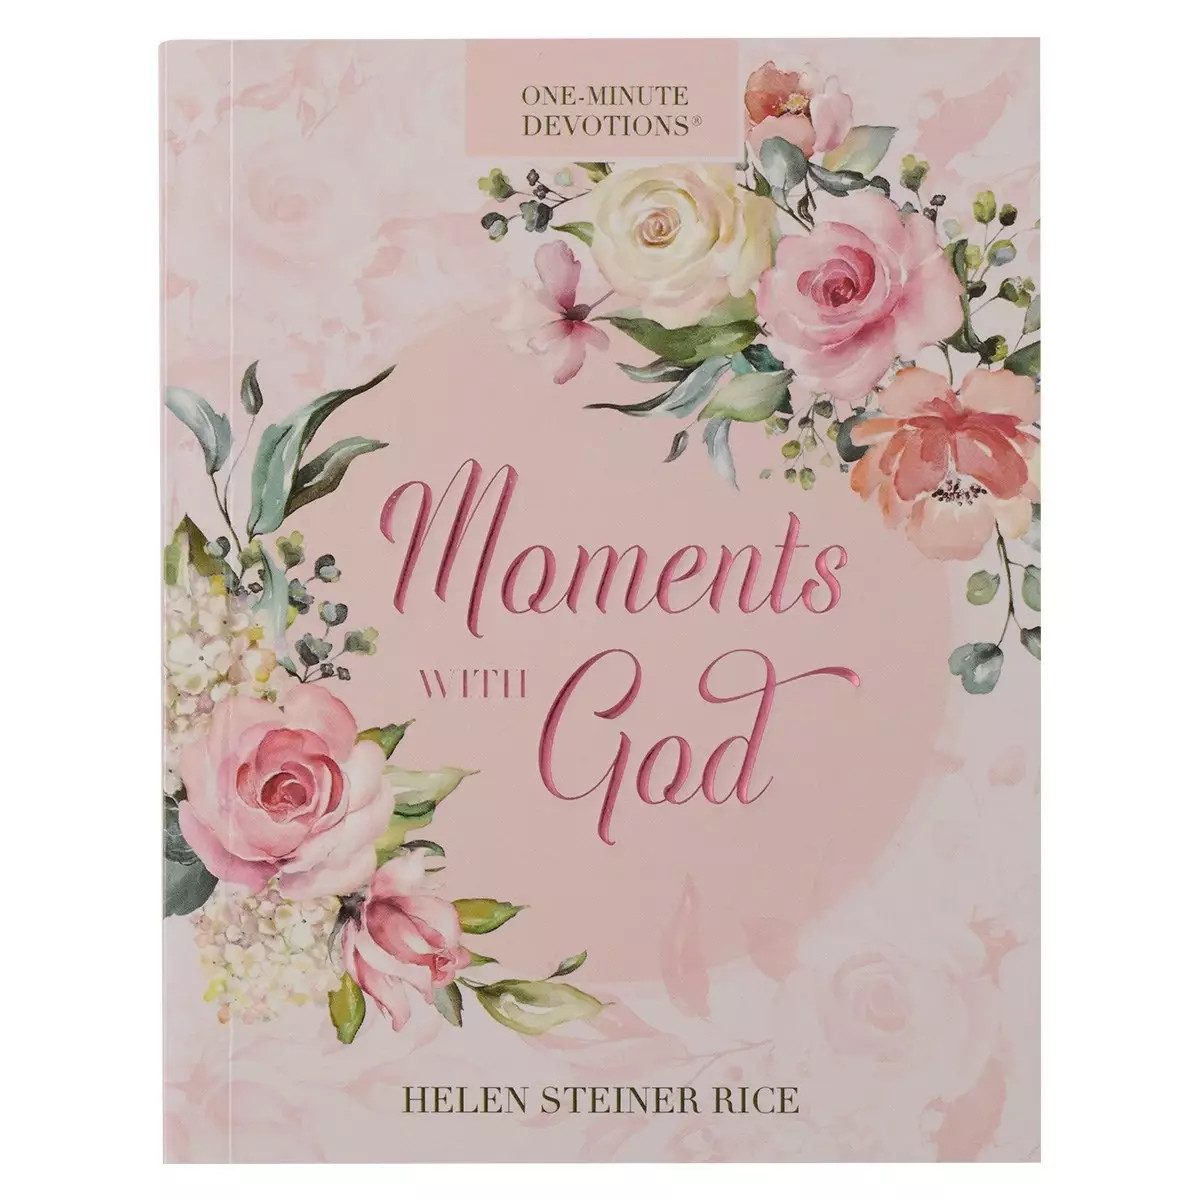 One-Minute Devotions Moments with God Softcover